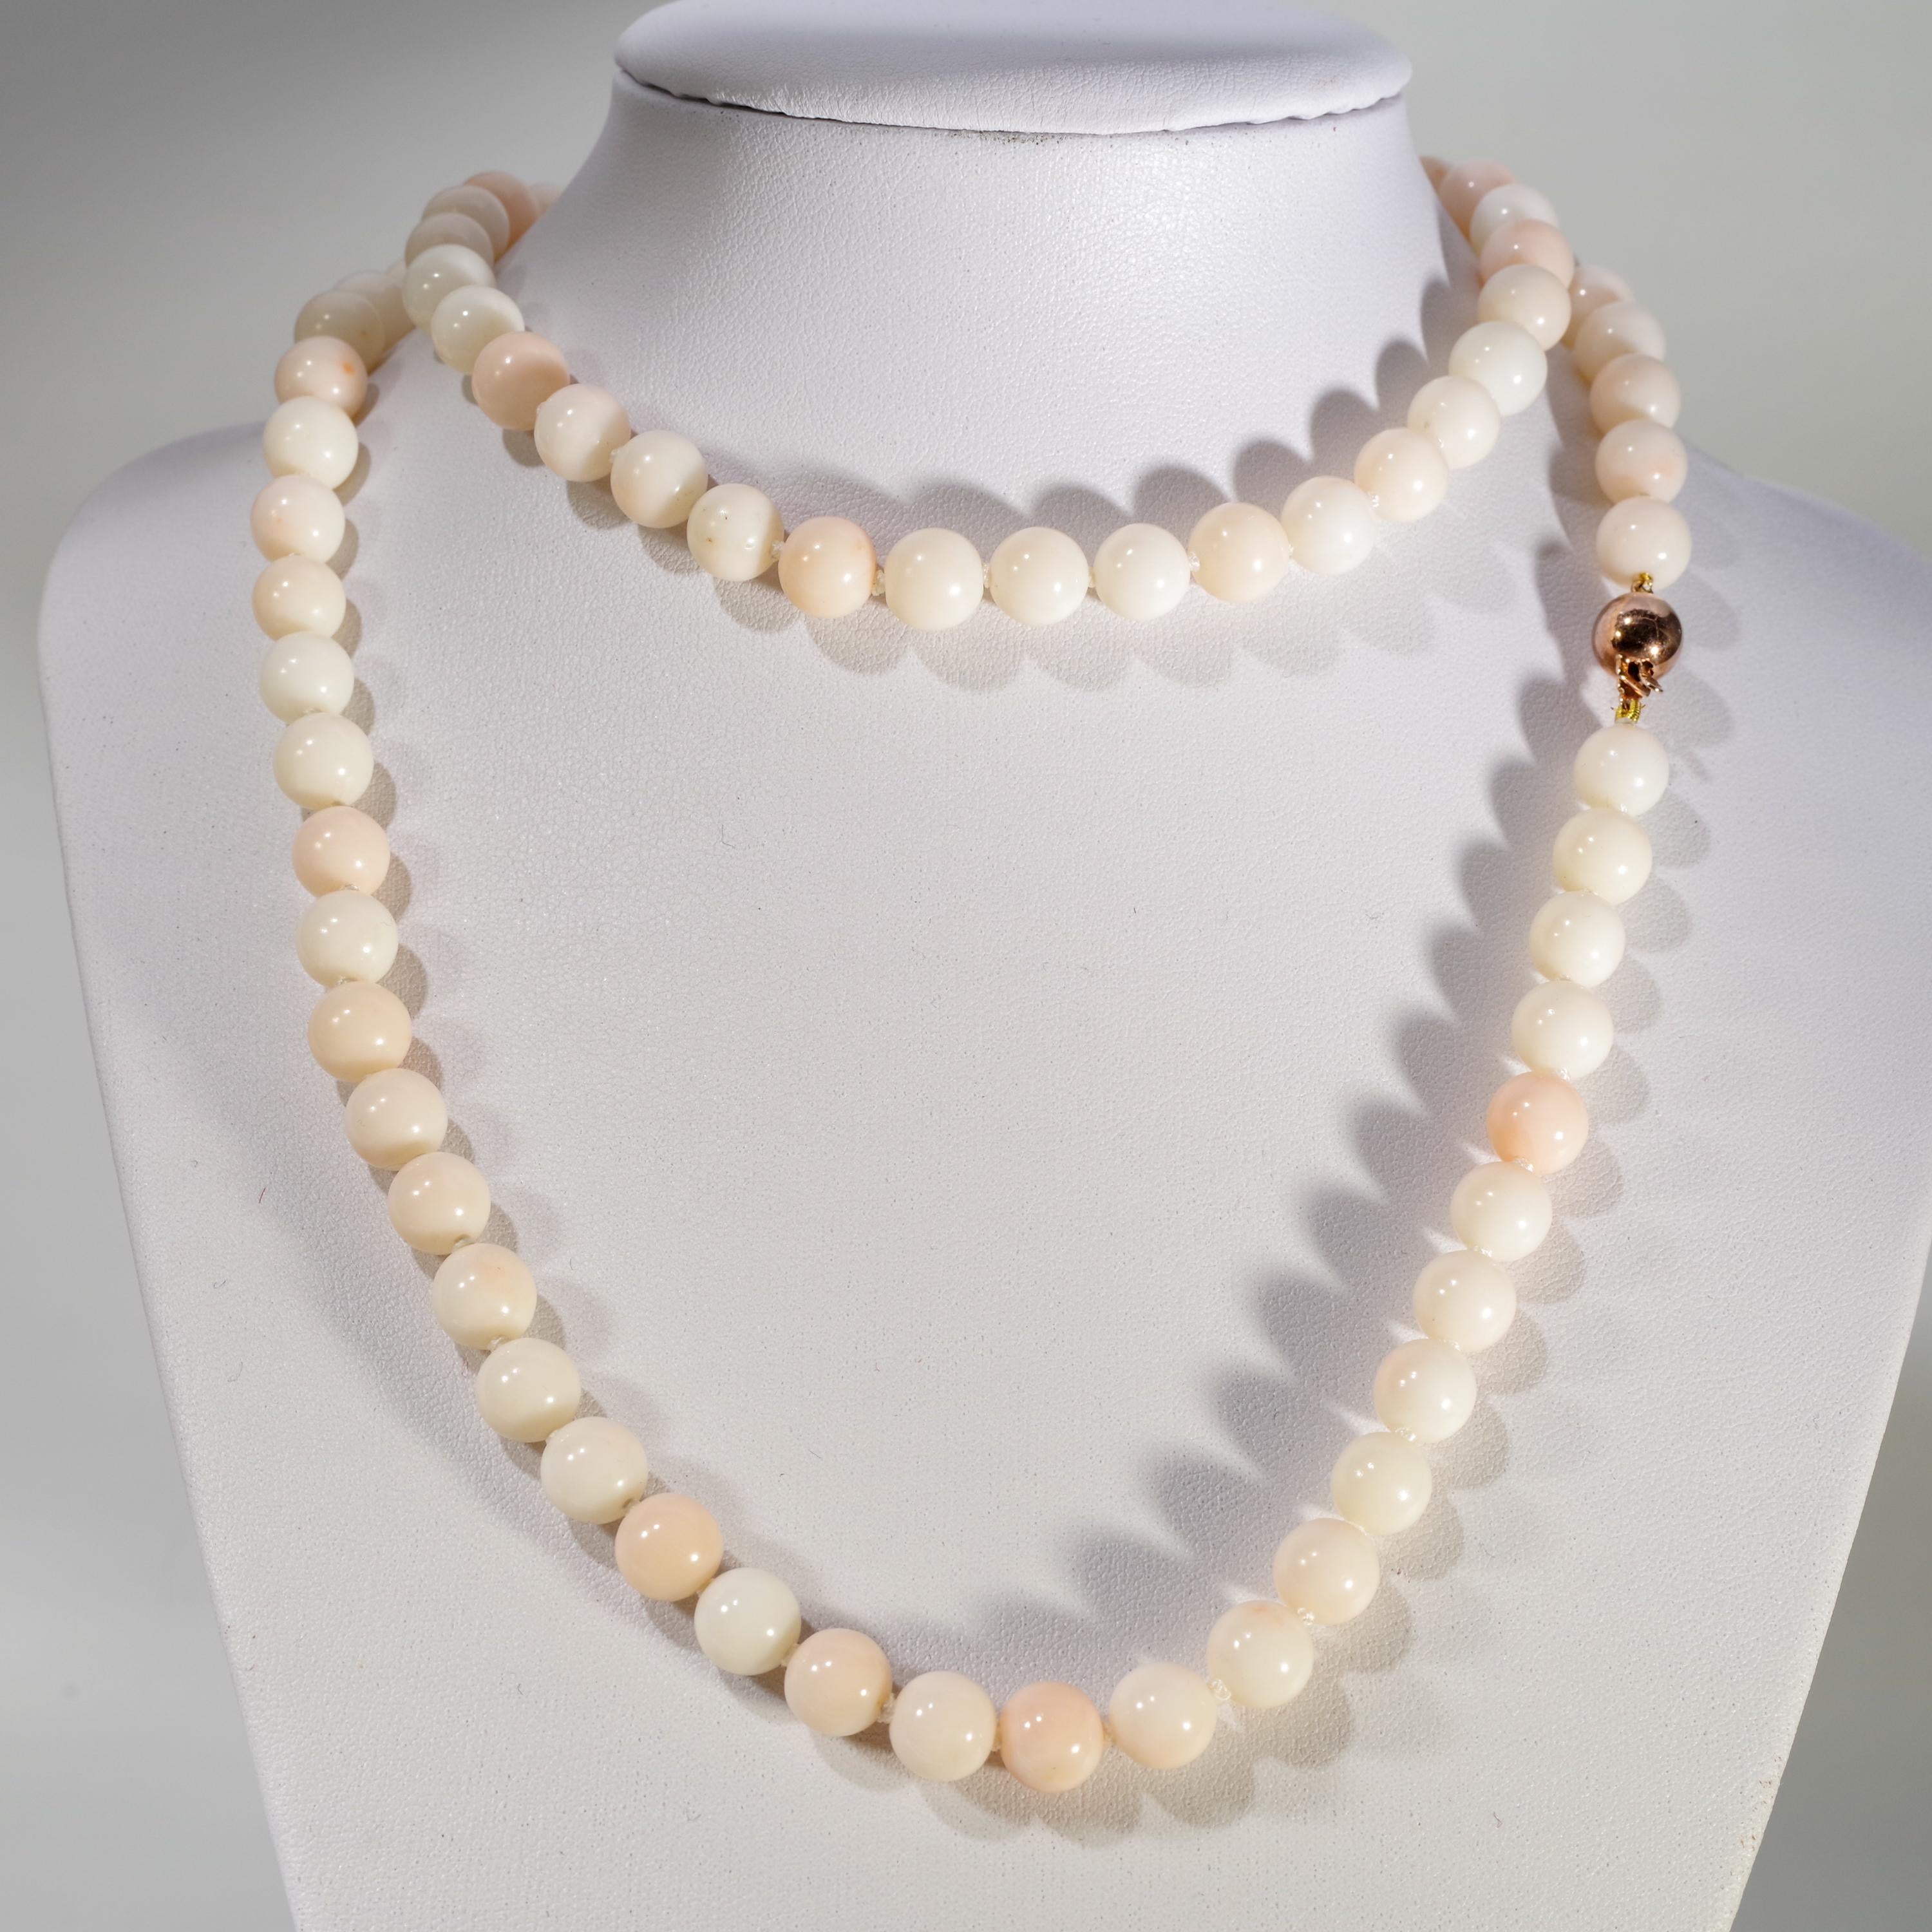 This is an exceedingly fine-quality opera-length necklace of large( 6 mm) certified natural and untreated angel skin precious coral beads that were hand-carved and polished to create this glorious jewel from the sea. The beads date to the 1950s